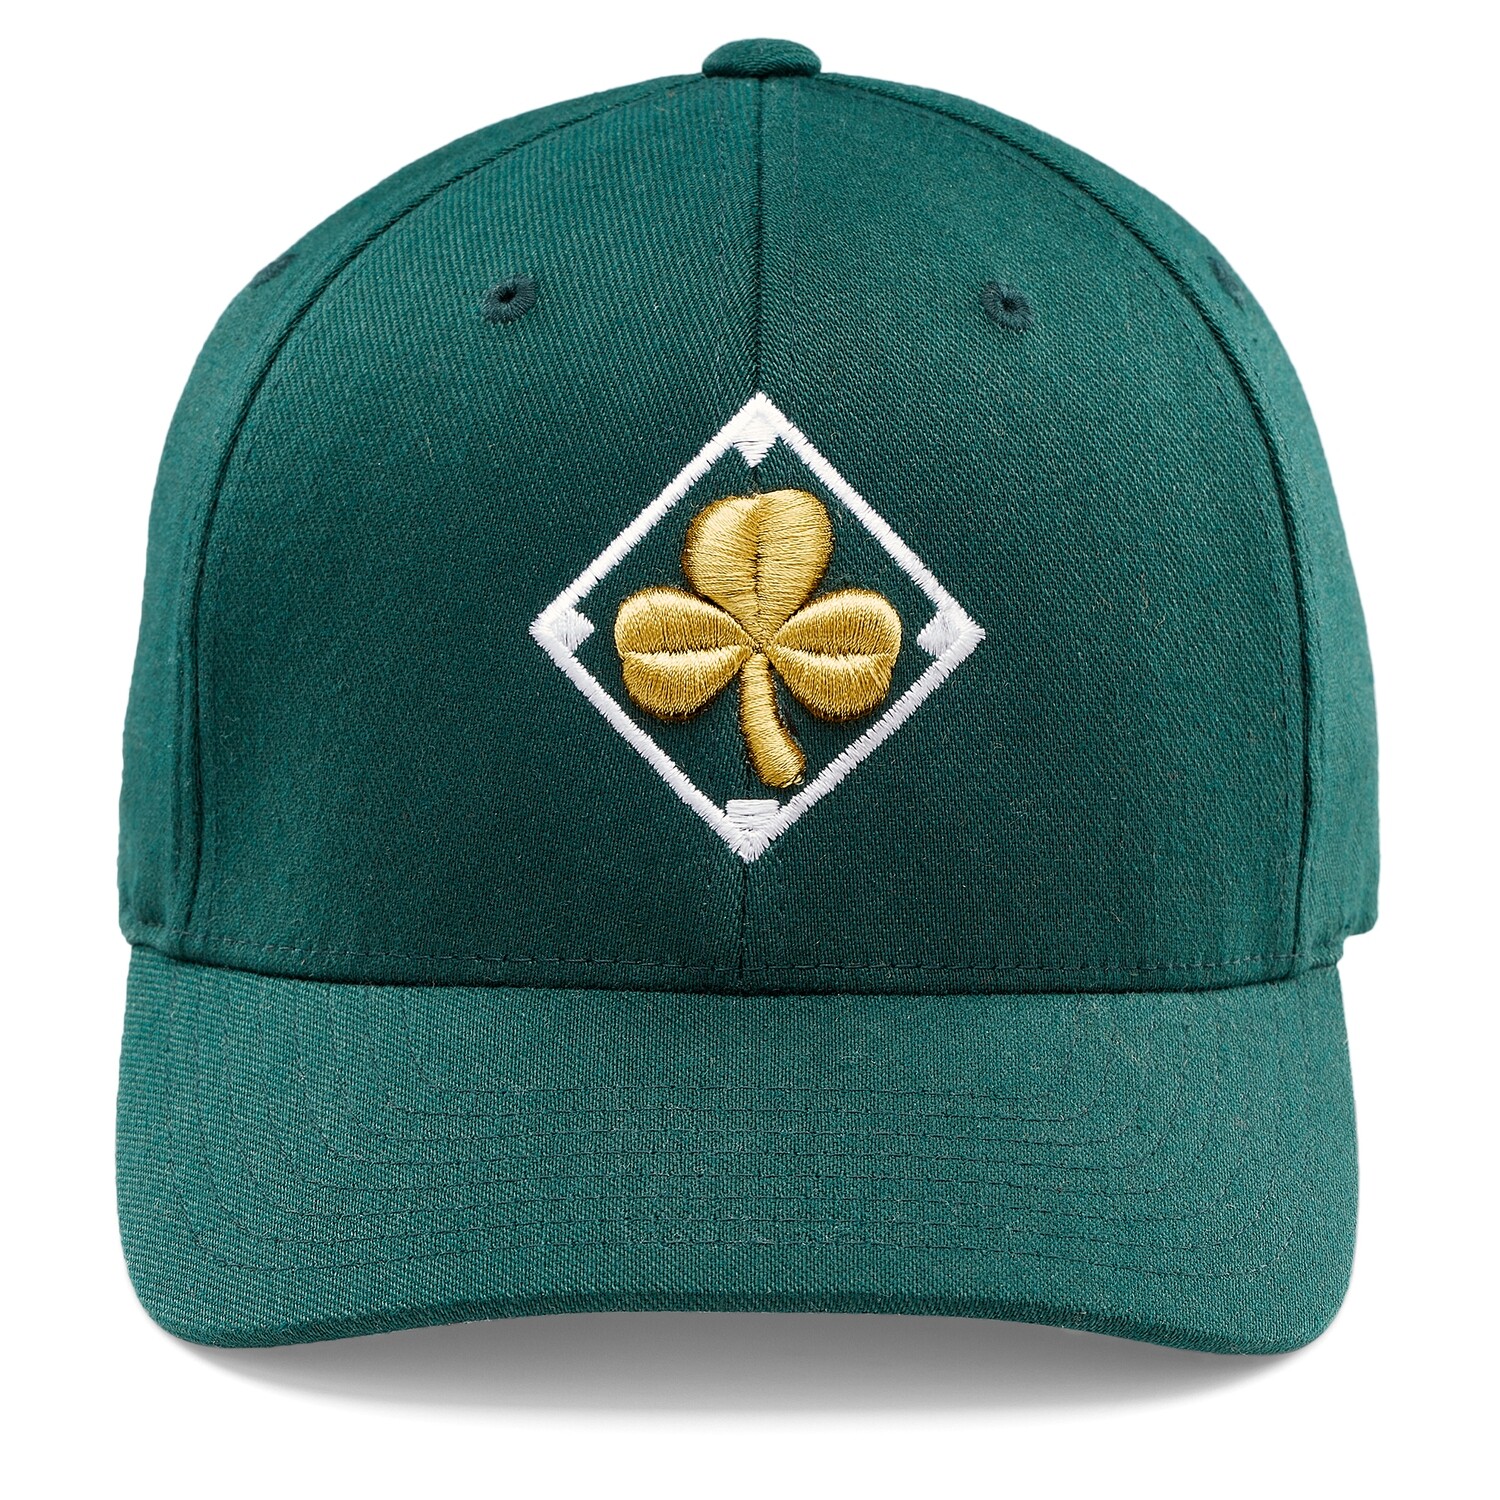 Green and Gold Baseball Cap with Ireland Flag, Size: LG-XL (7 3/8 - 7 5/8)